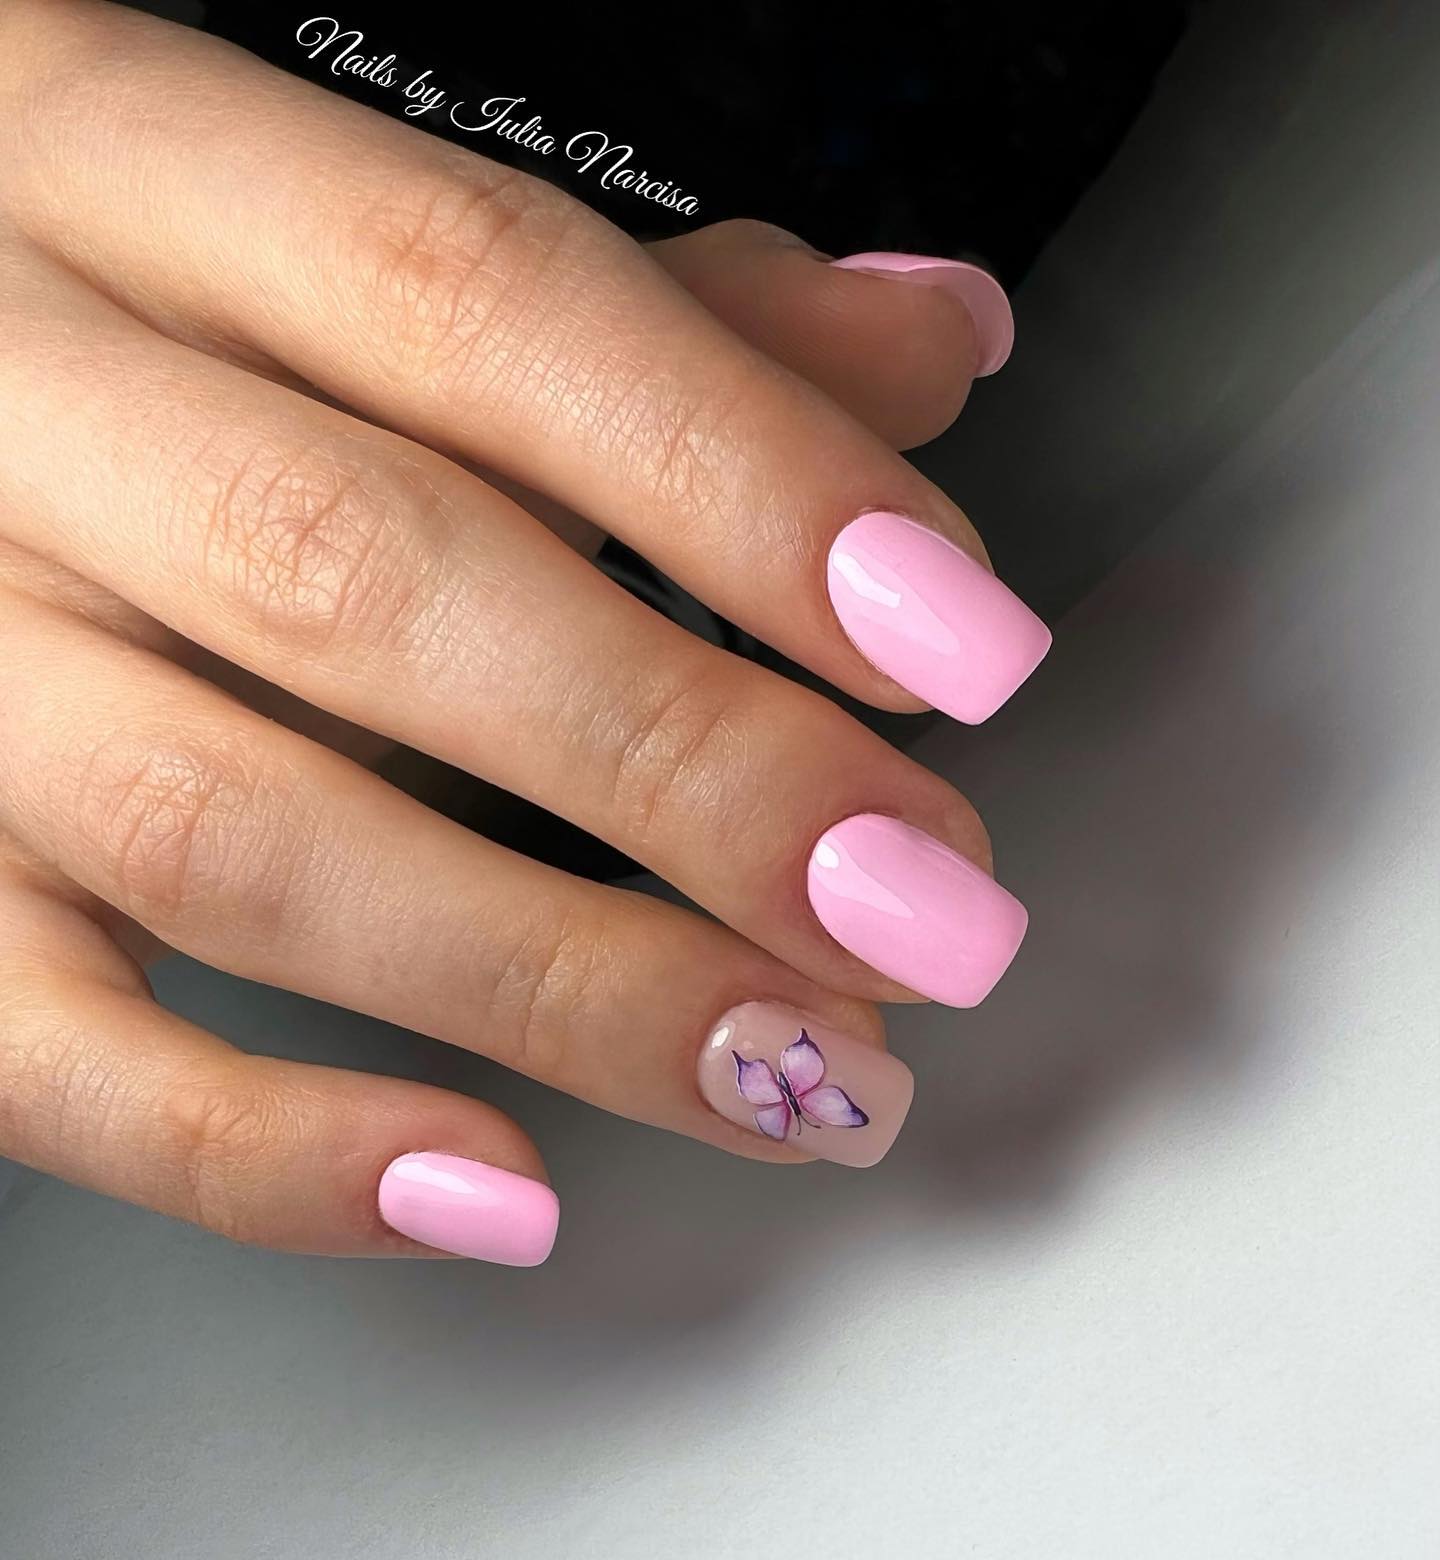 If you want to have a chic and classy look with nail stickers, you can use a pinky butterfly sticker like this.